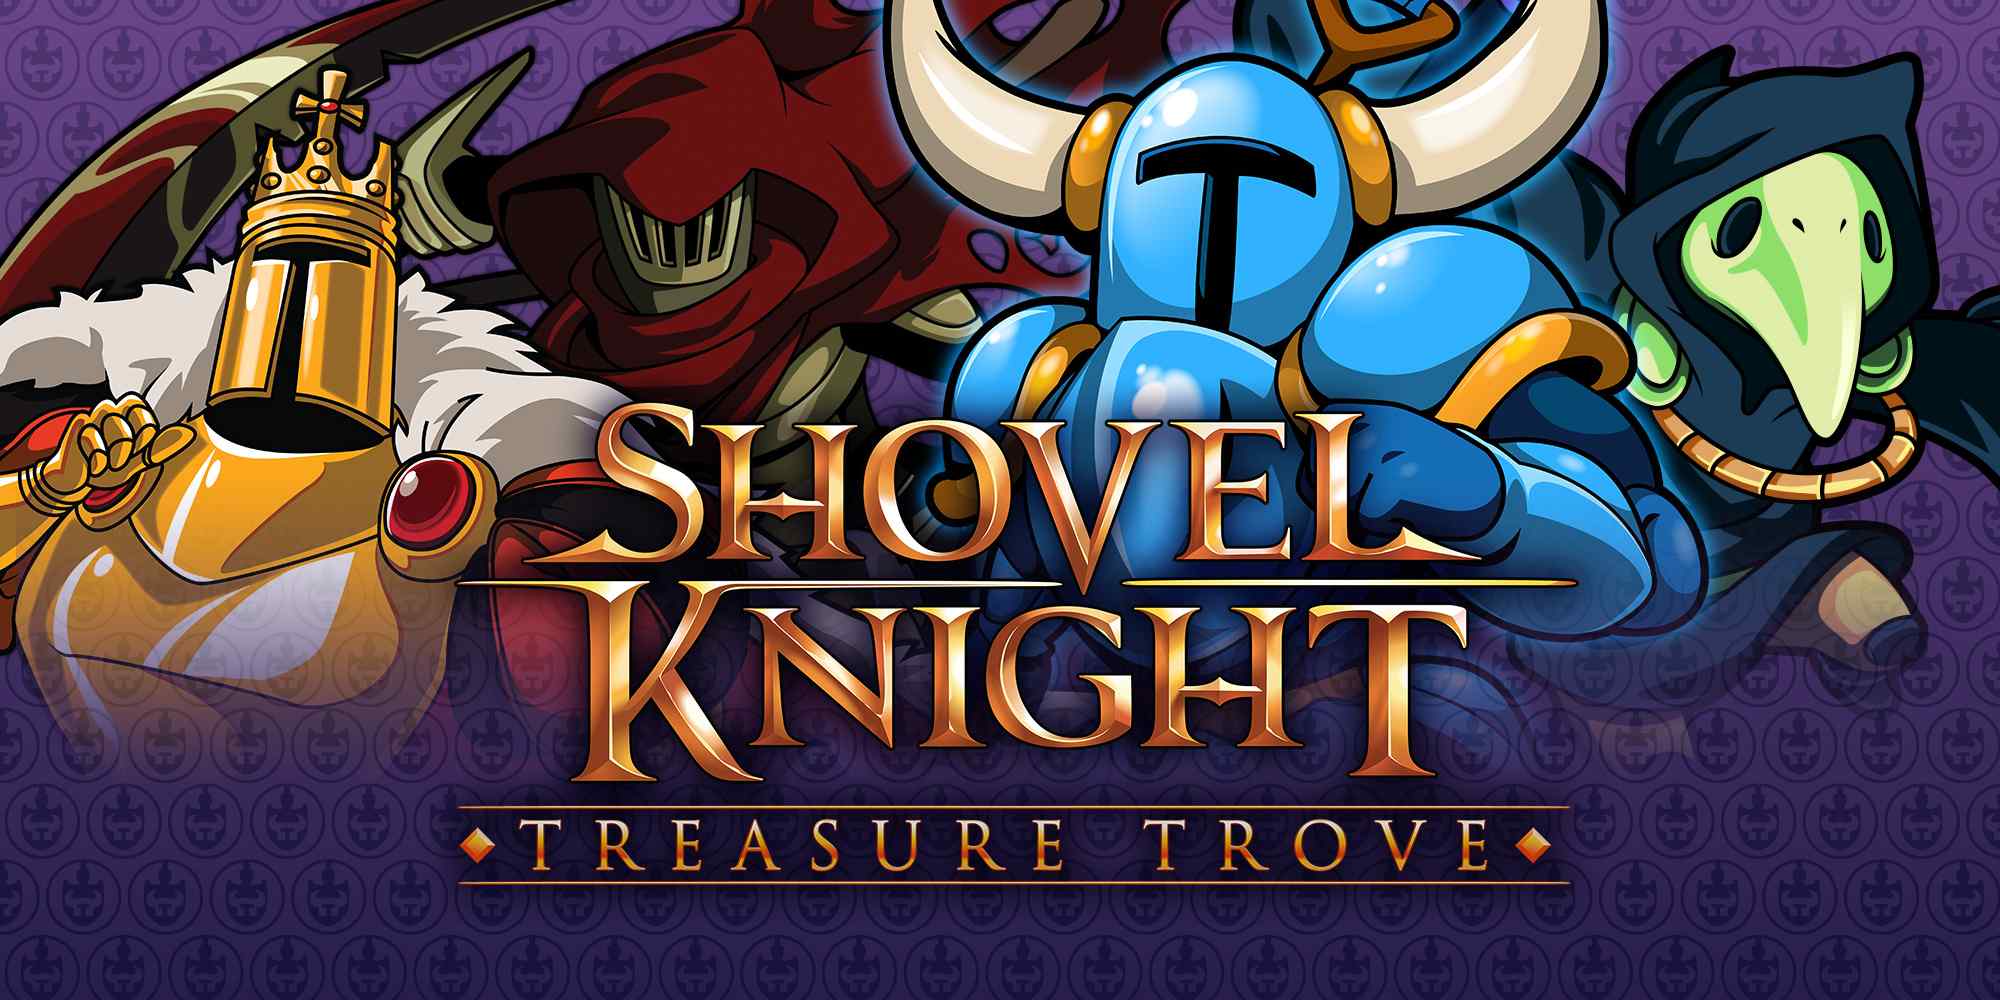 Shovel Knight is a platform game made by Yacht Club Games and released in 2014.